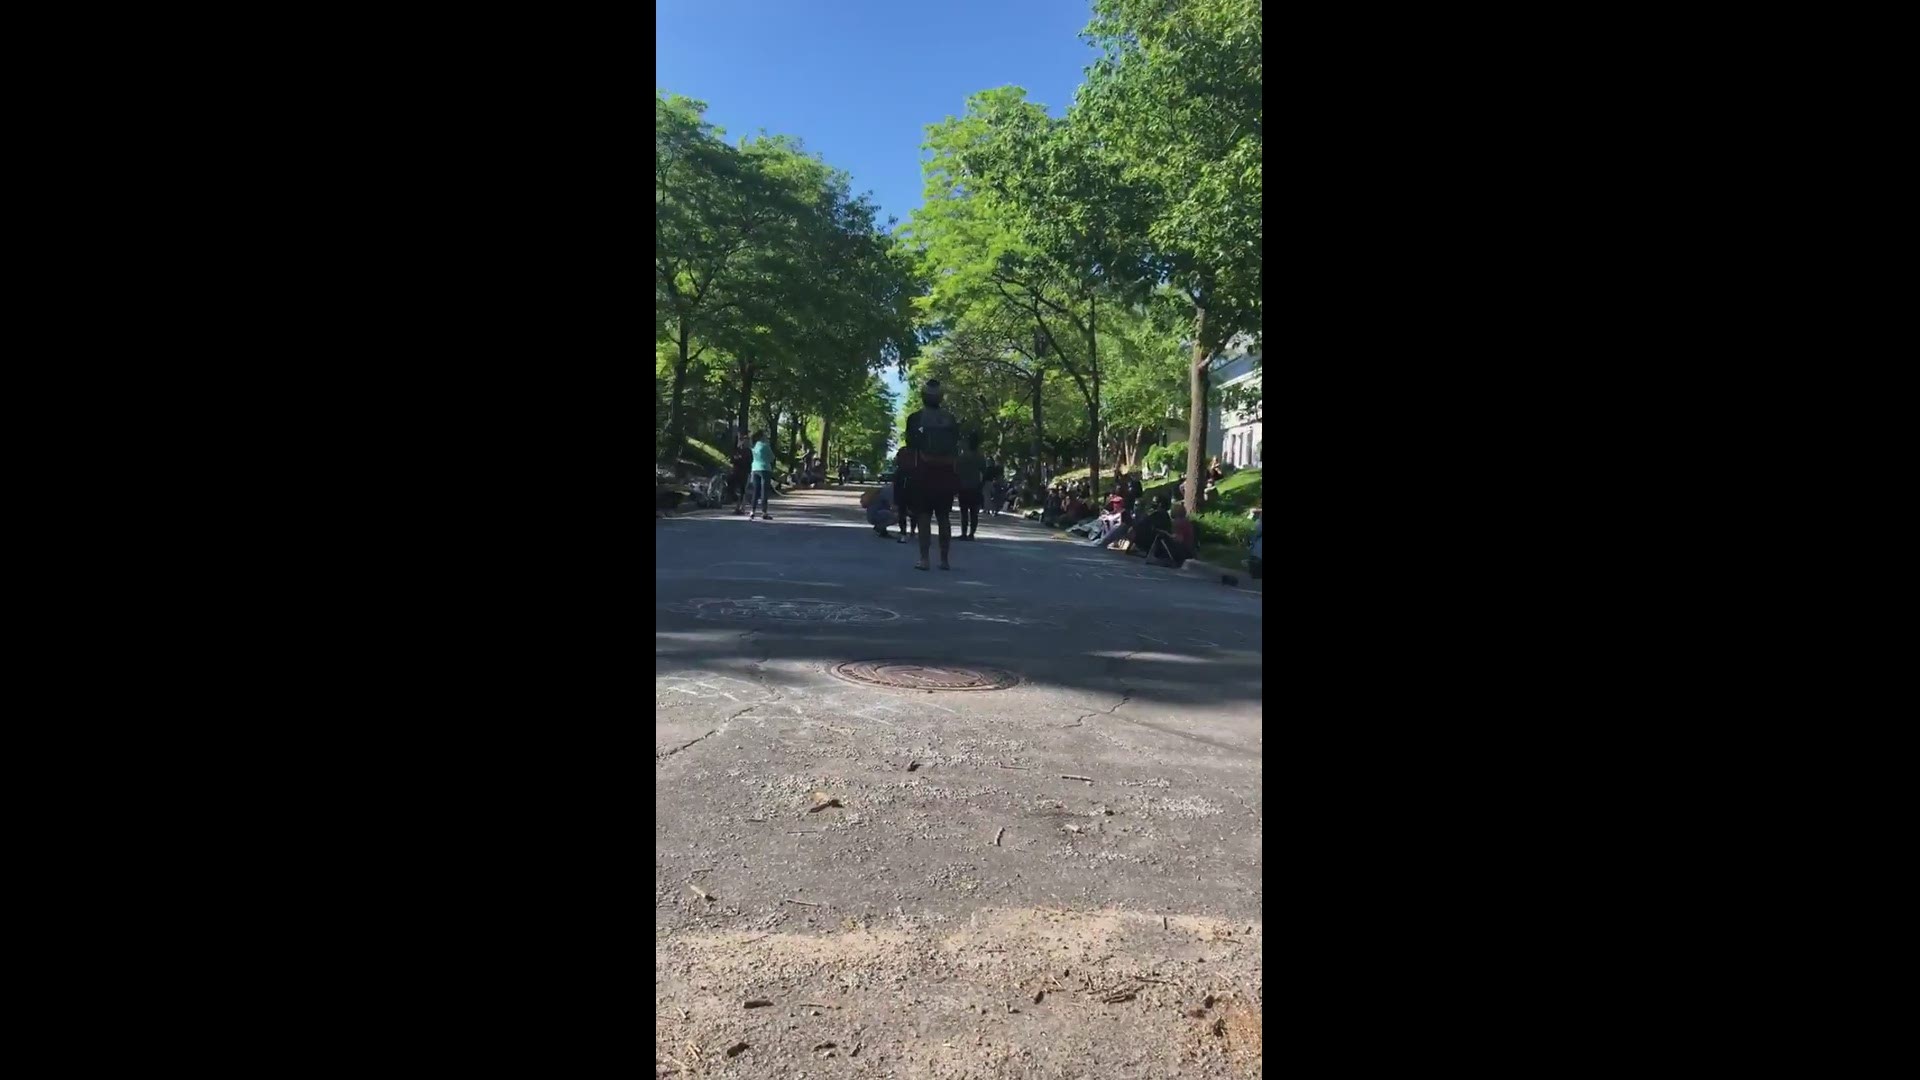 Protesters called for Hennepin County Attorney Mike Freeman to make "3 more" arrests in the death of George Floyd on May 29, 2020. Video by @SaraPimental